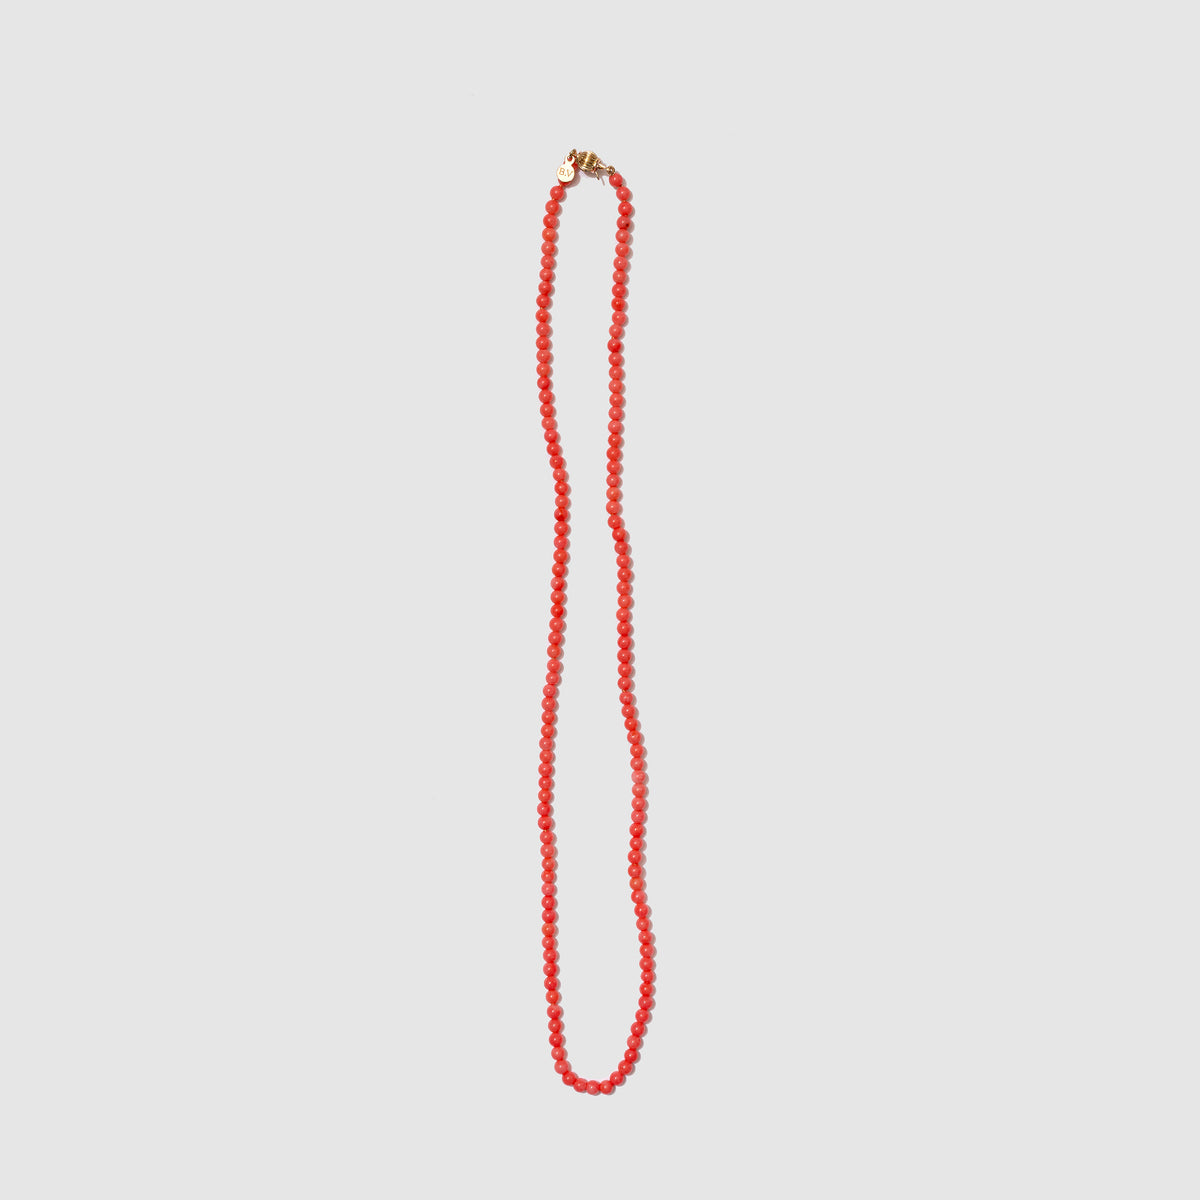 Beatrice Valenzuela - PINK BAMBOO CORAL BRUJERÍA NECKLACE